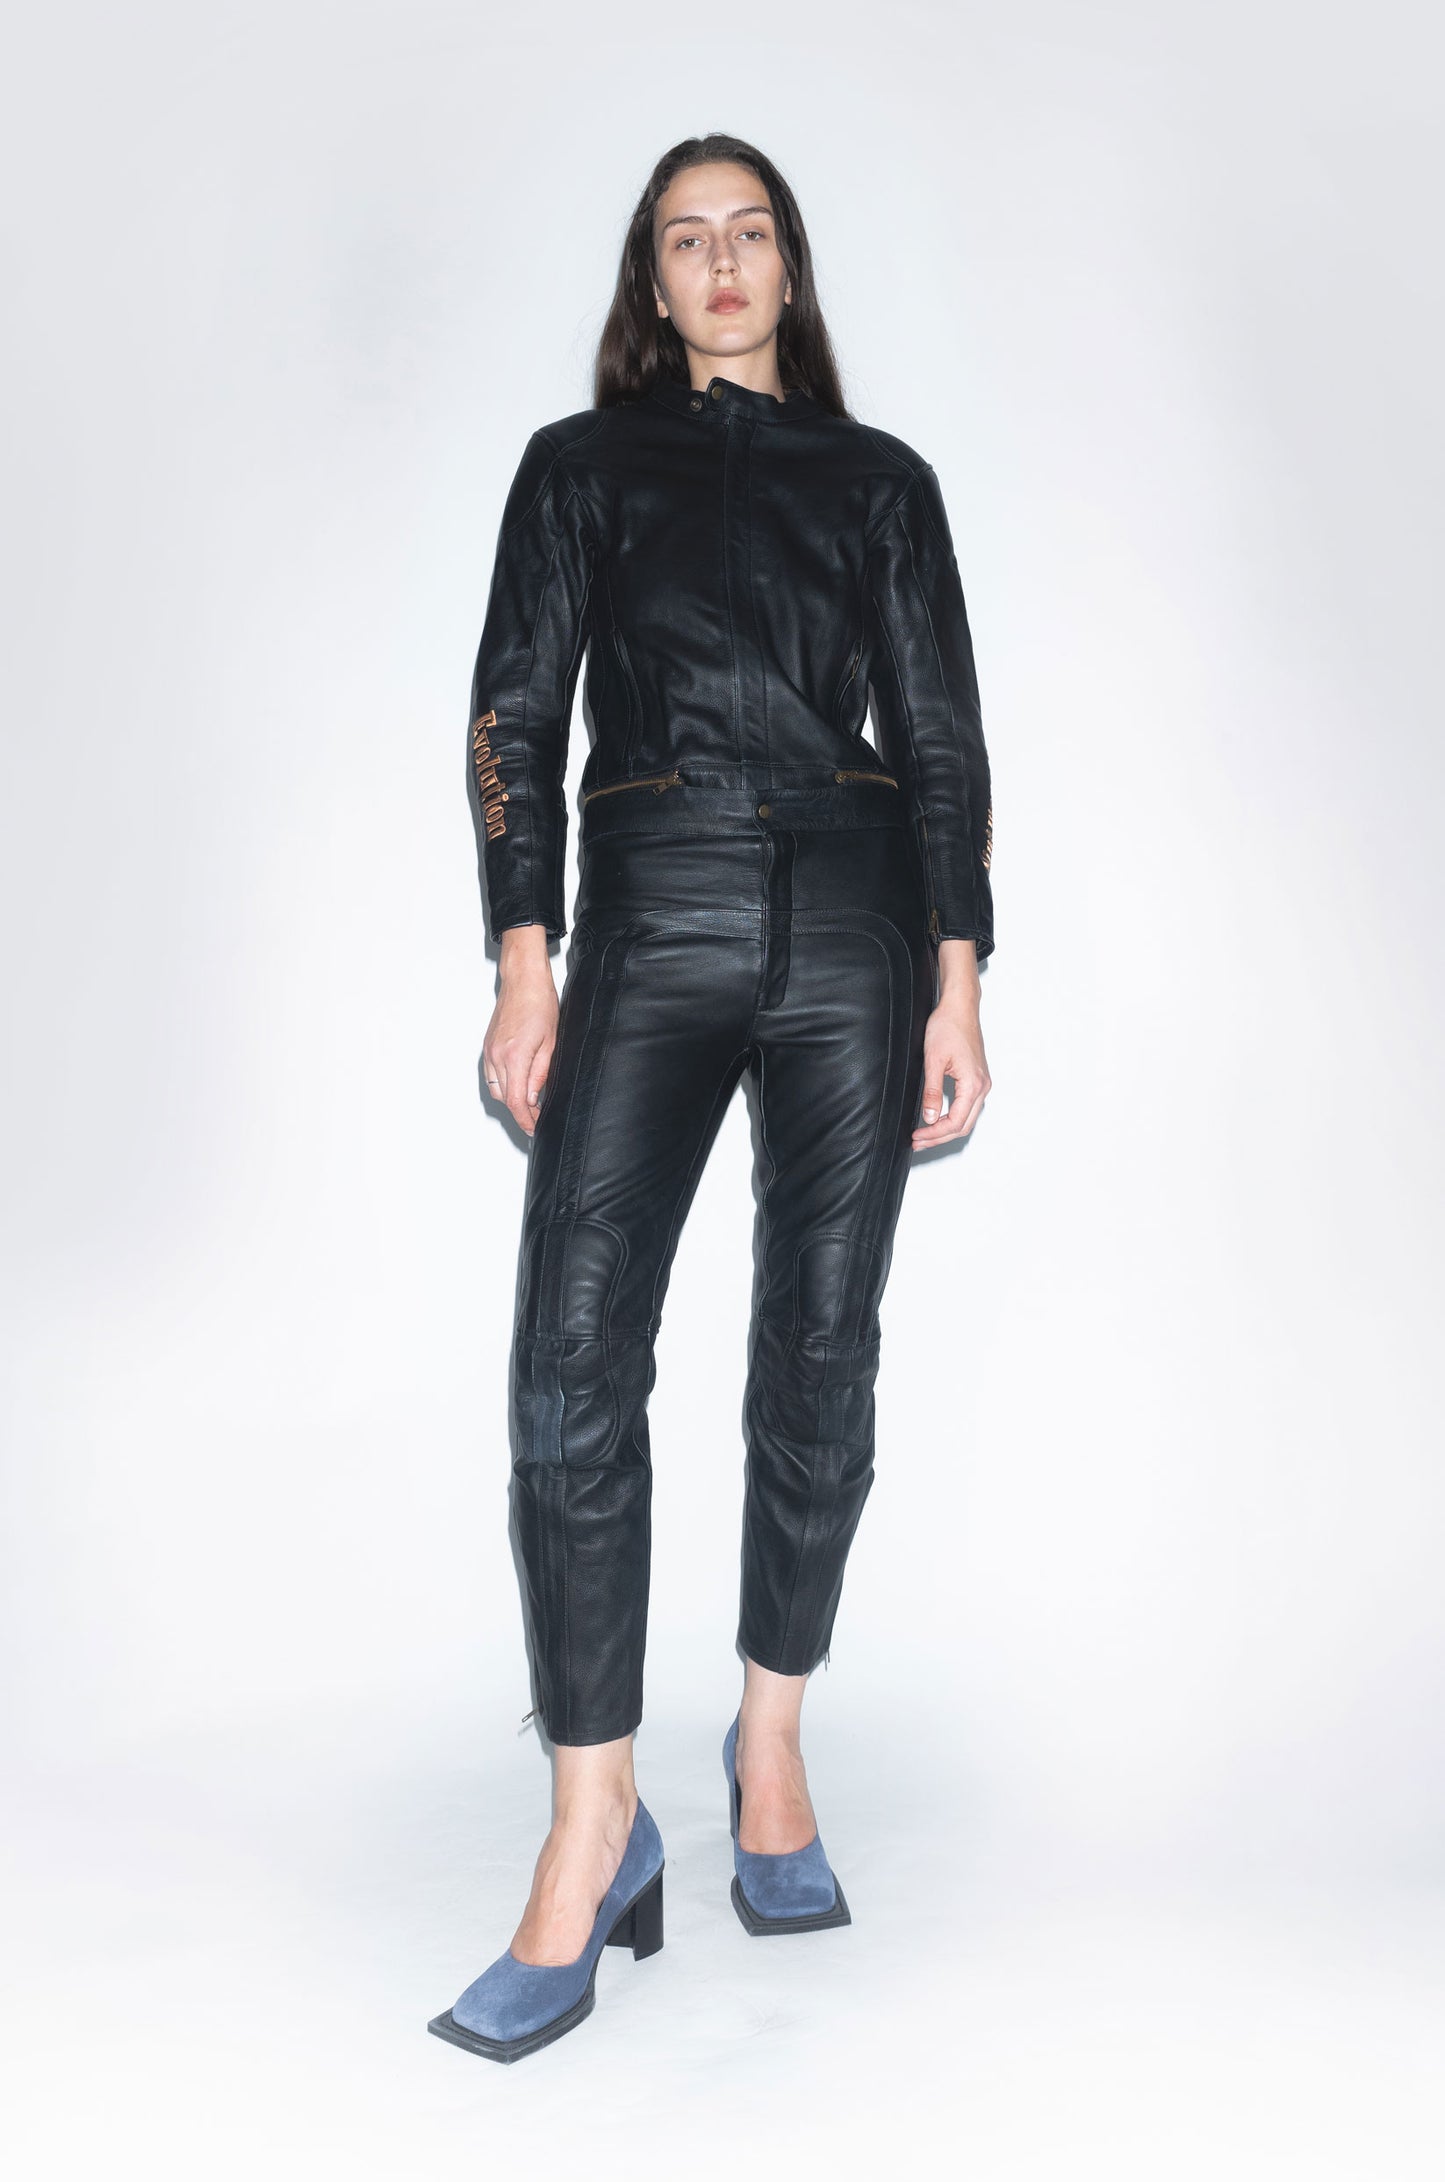 Runway Two-piece Motor Suit in Black Leather with embroidery